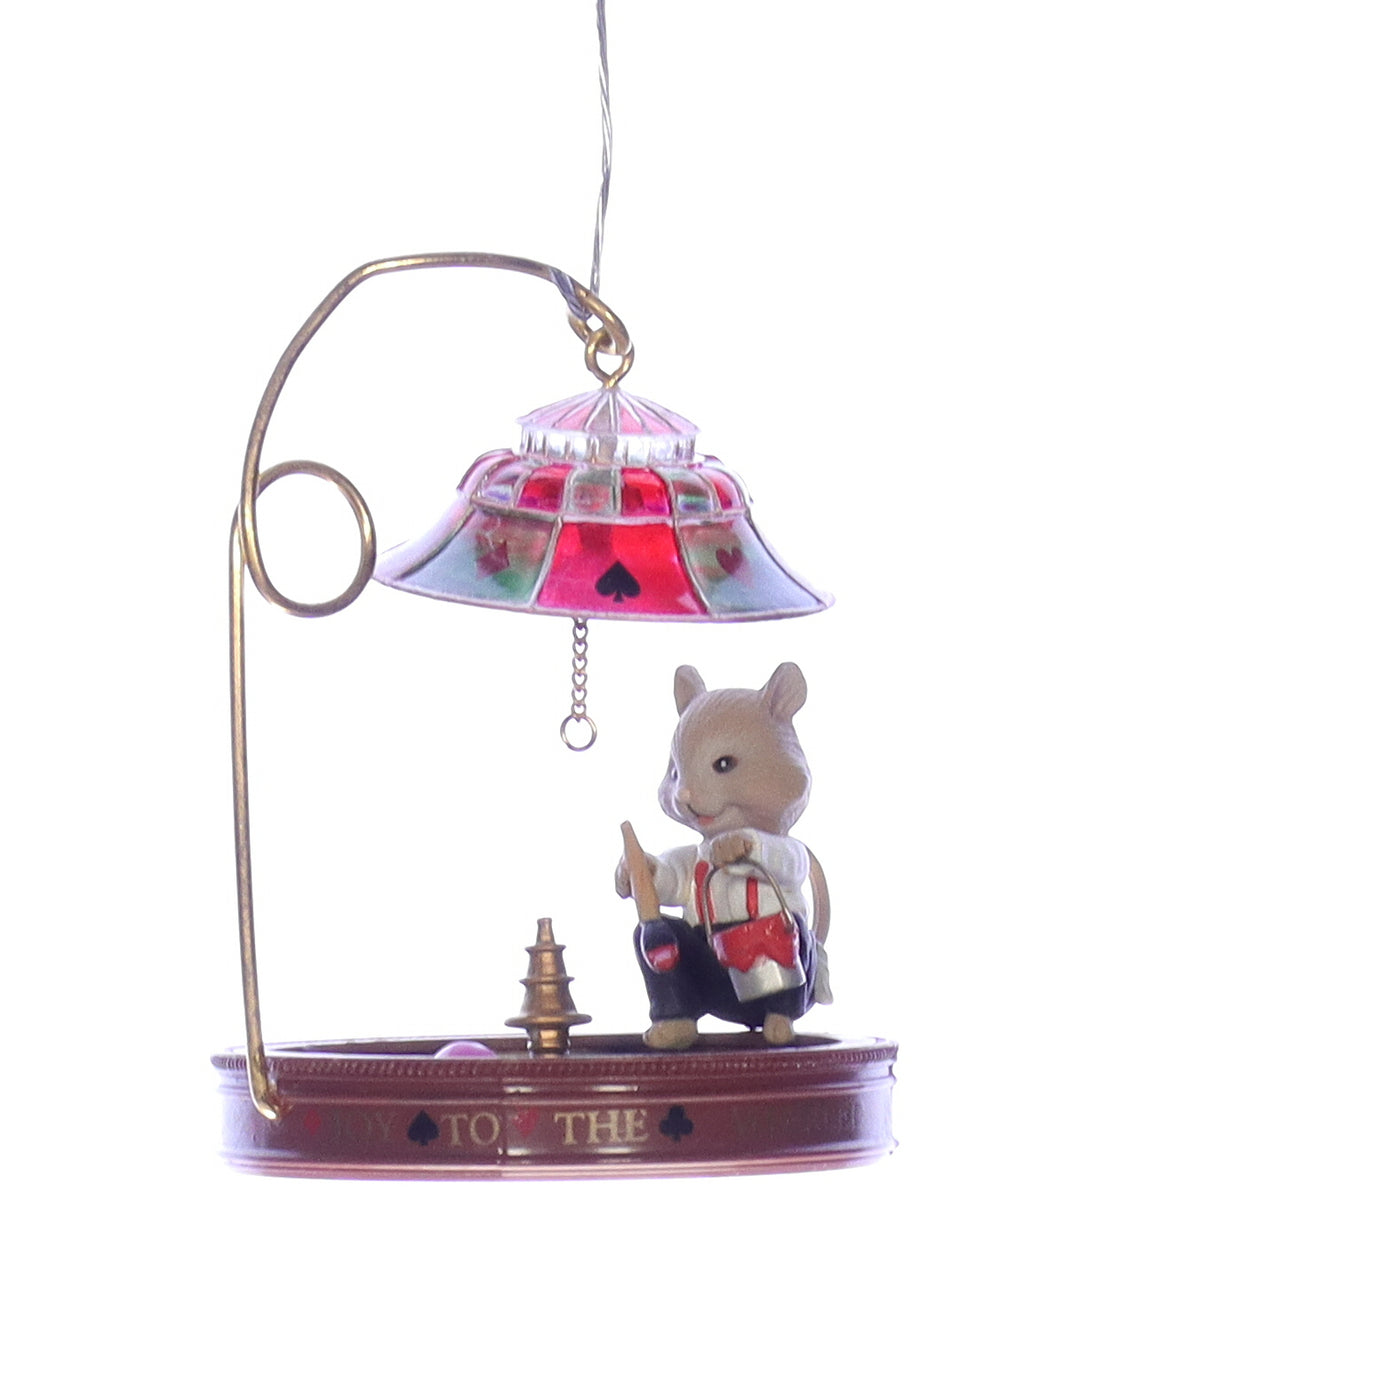 Enesco_Treasury_of_Christmas_Ornaments_859551_Joy_to_the_Whirled_Christmas_Ornament_1993 Front Right View